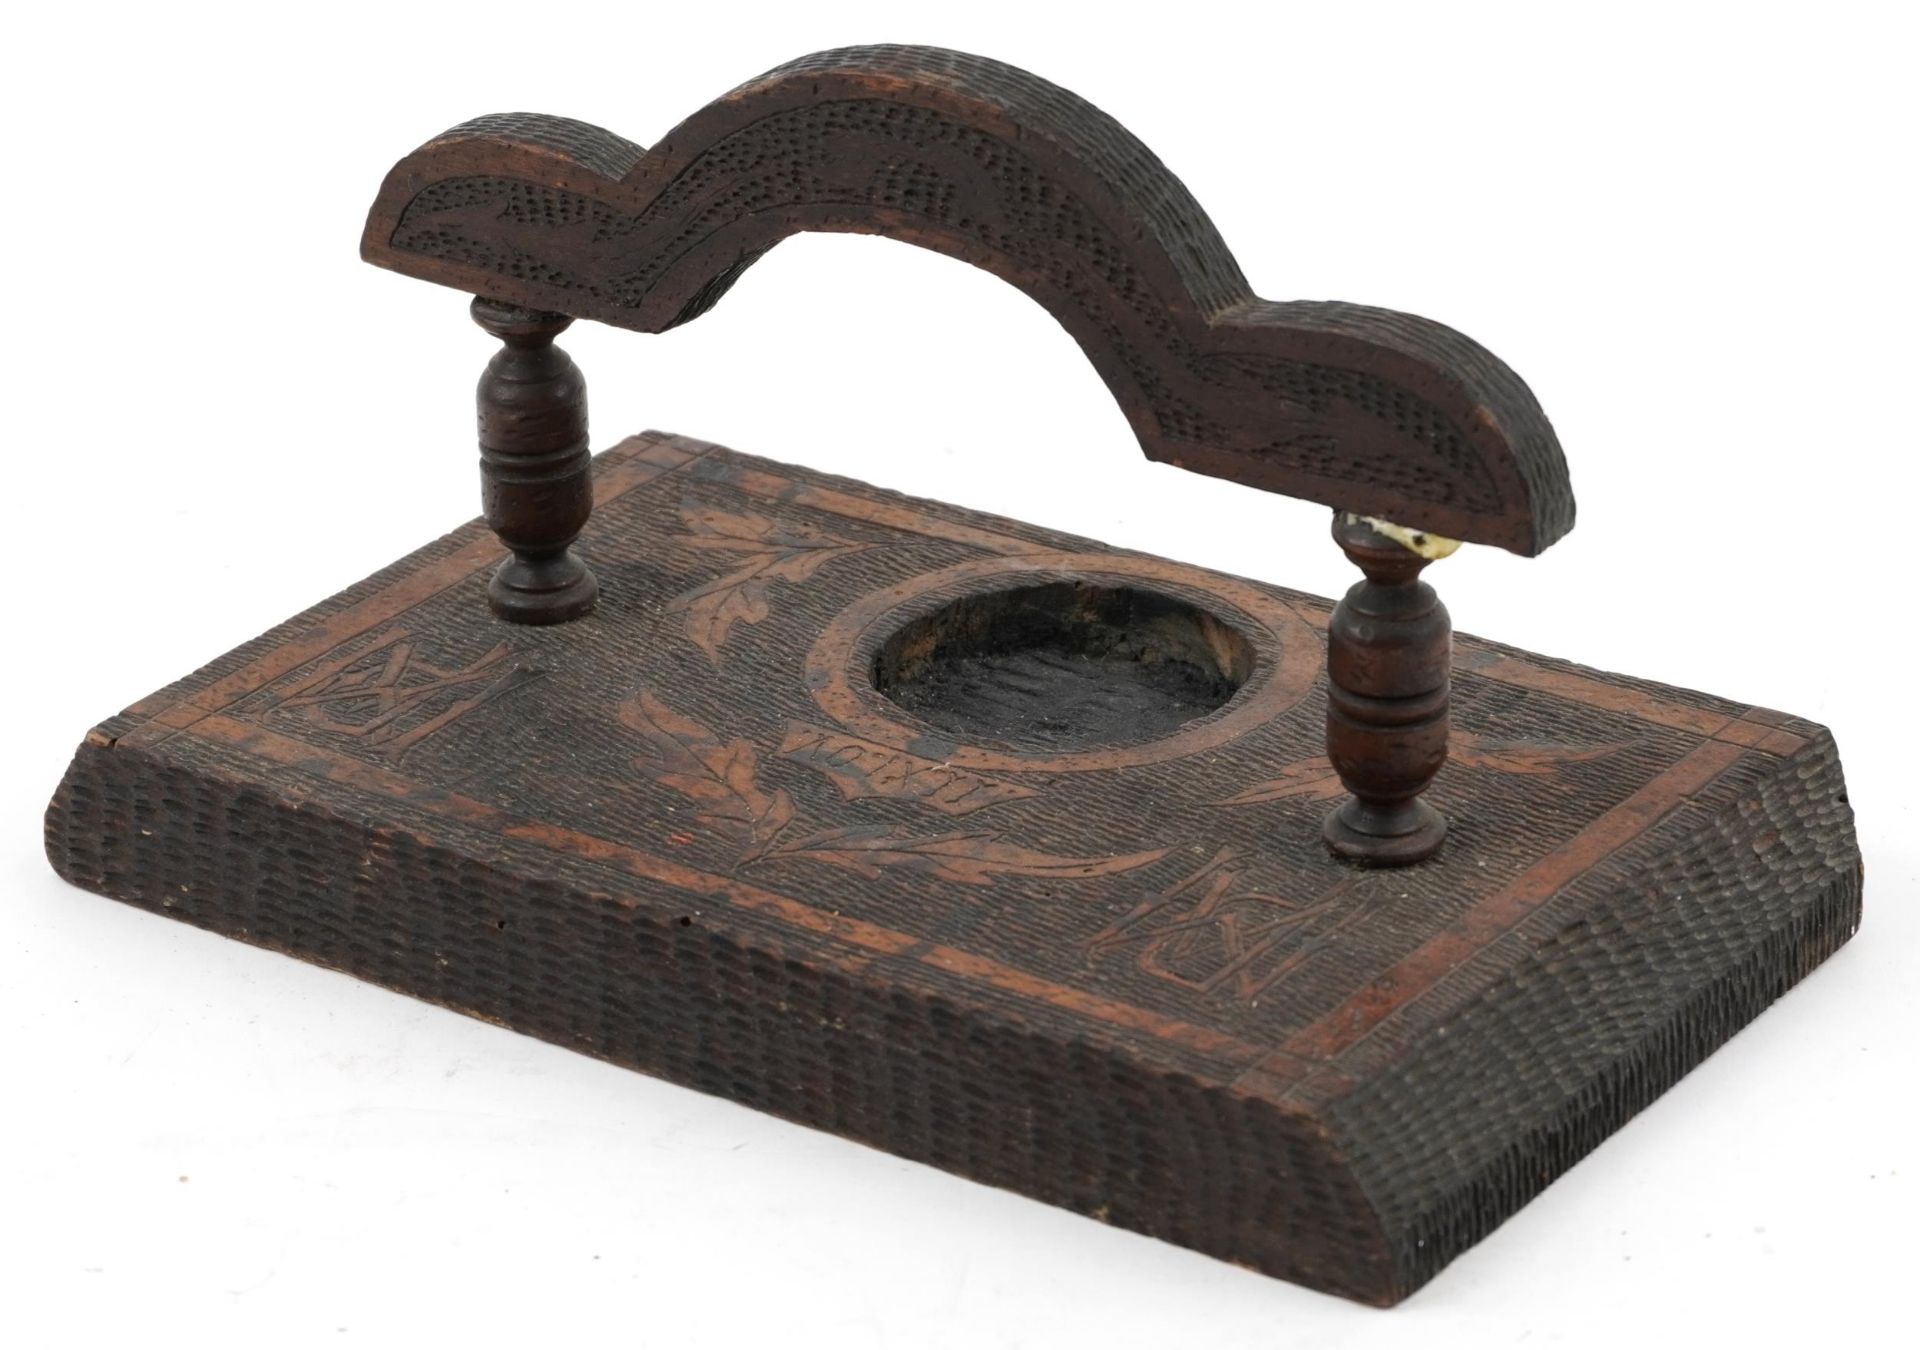 19th century Black Forest desk stand carved with leaves and monograms : For further information on - Image 2 of 3